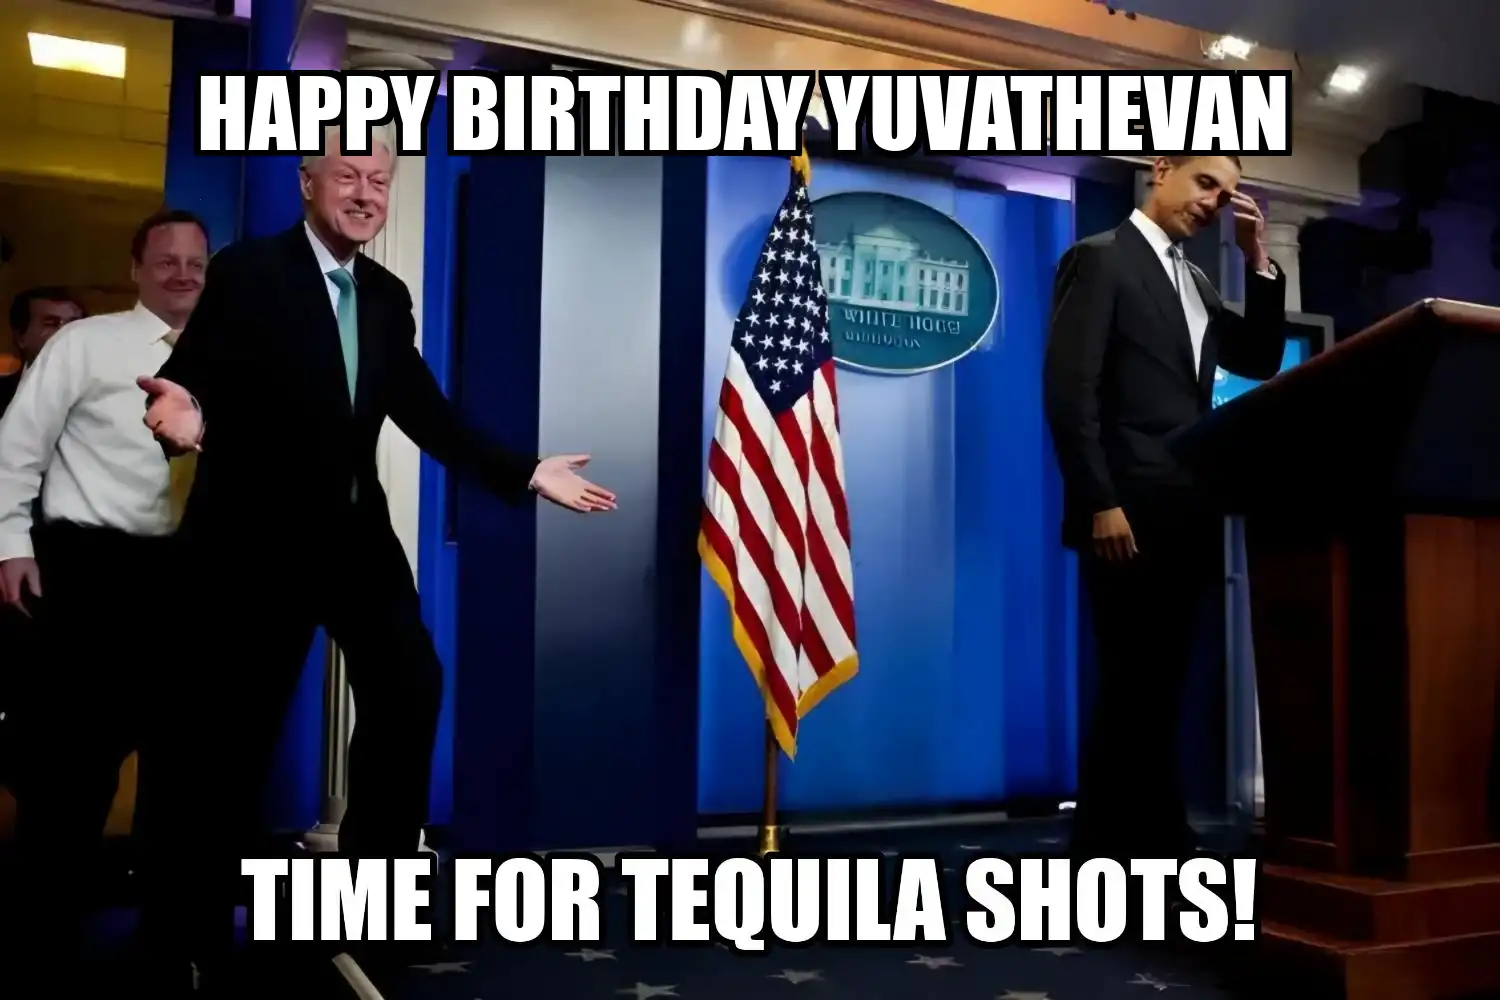 Happy Birthday Yuvathevan Time For Tequila Shots Memes